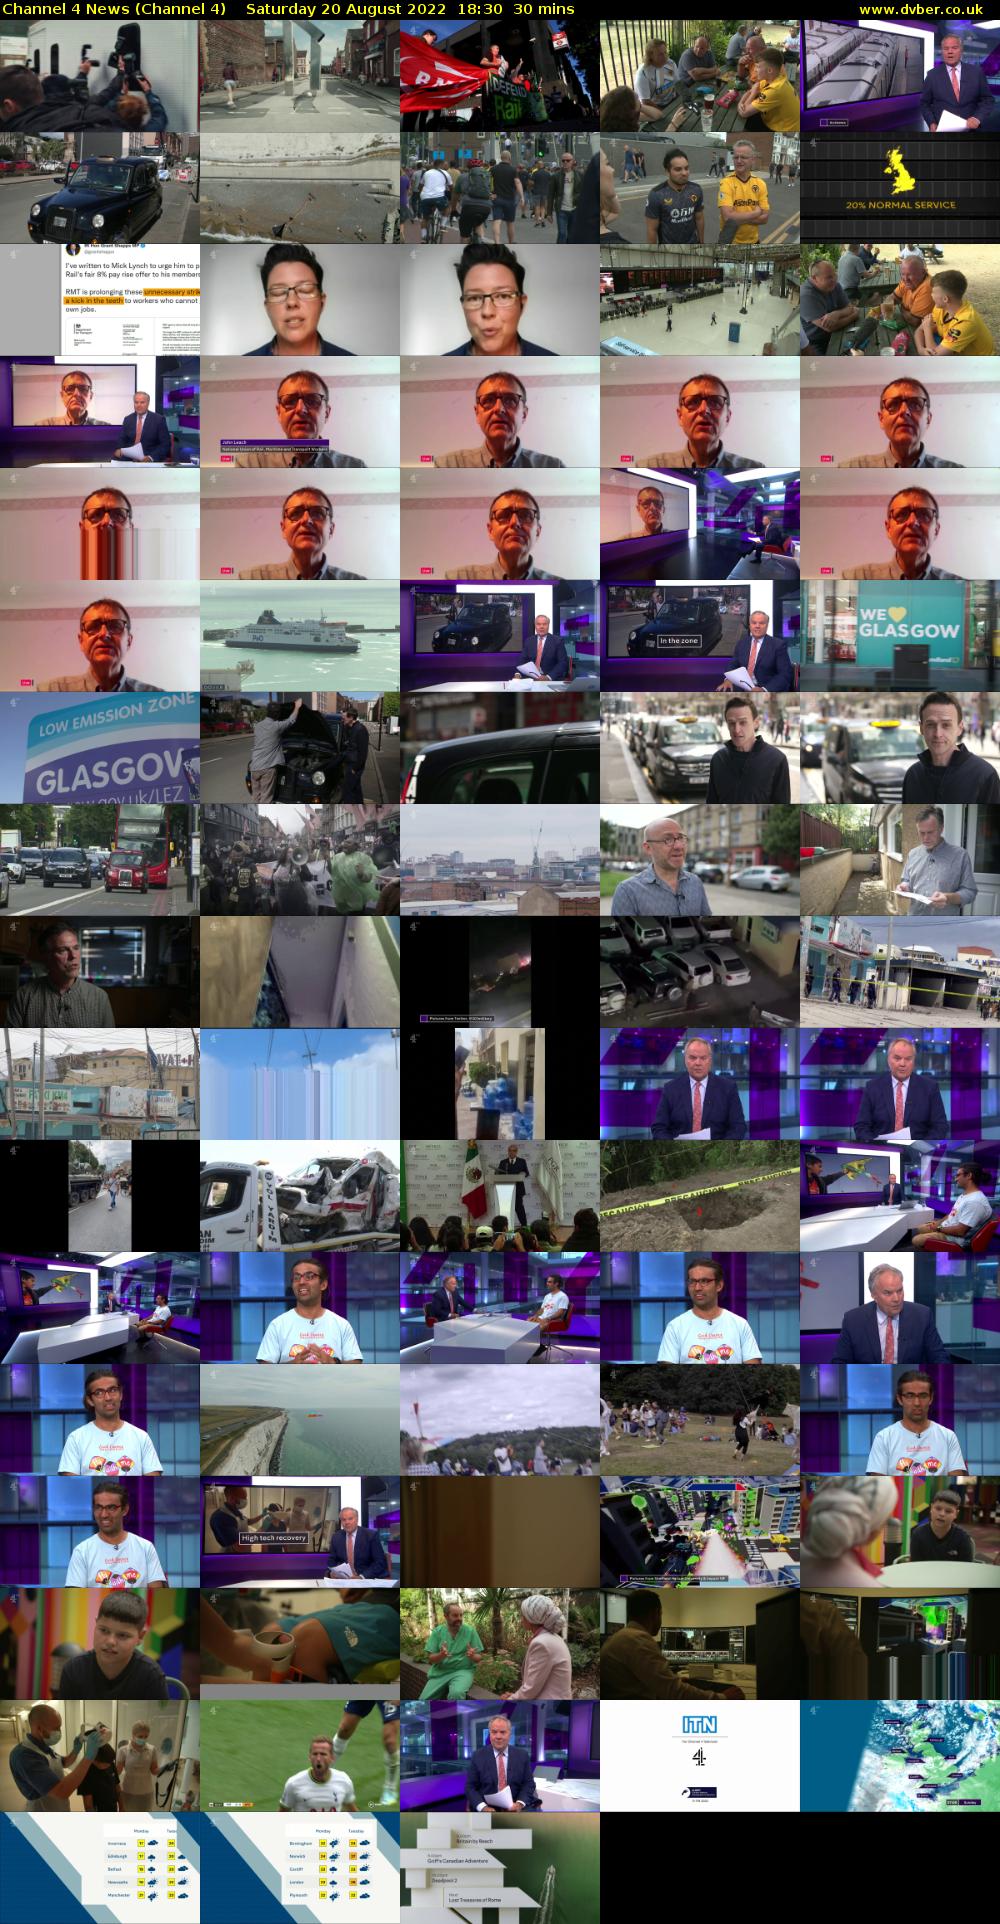 Channel 4 News (Channel 4) Saturday 20 August 2022 18:30 - 19:00